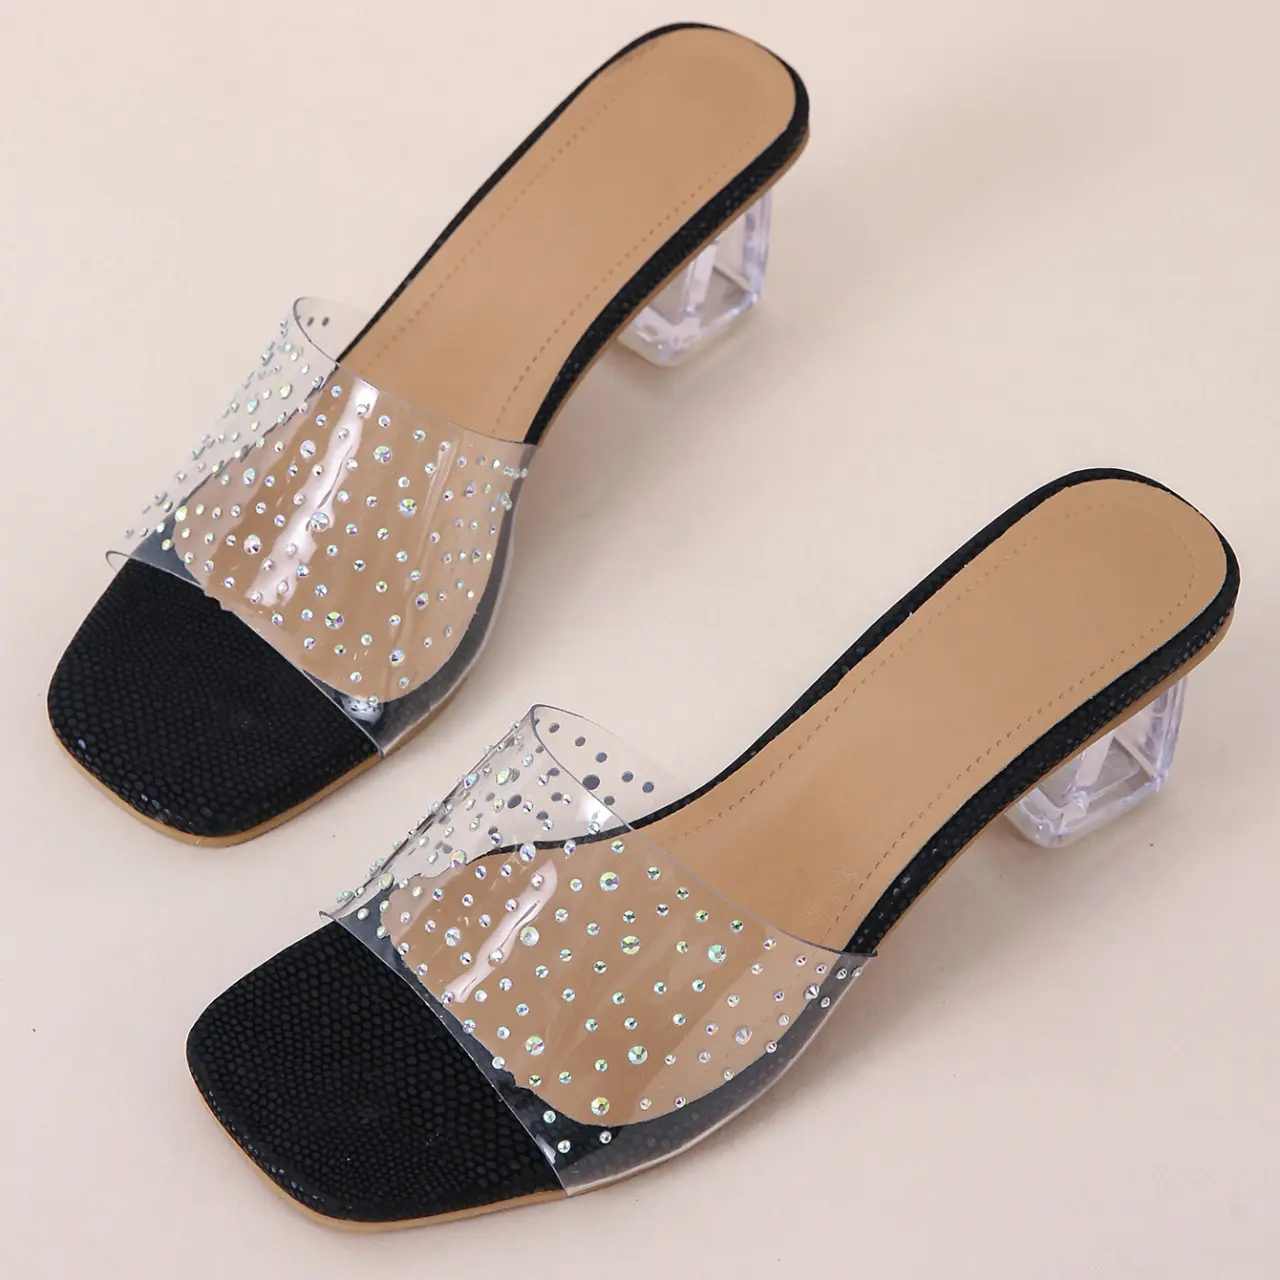 stylish slipper ladies outdoor high heeled women crystal fabric flip flops shoes women's new square toe crystal sandals slippers